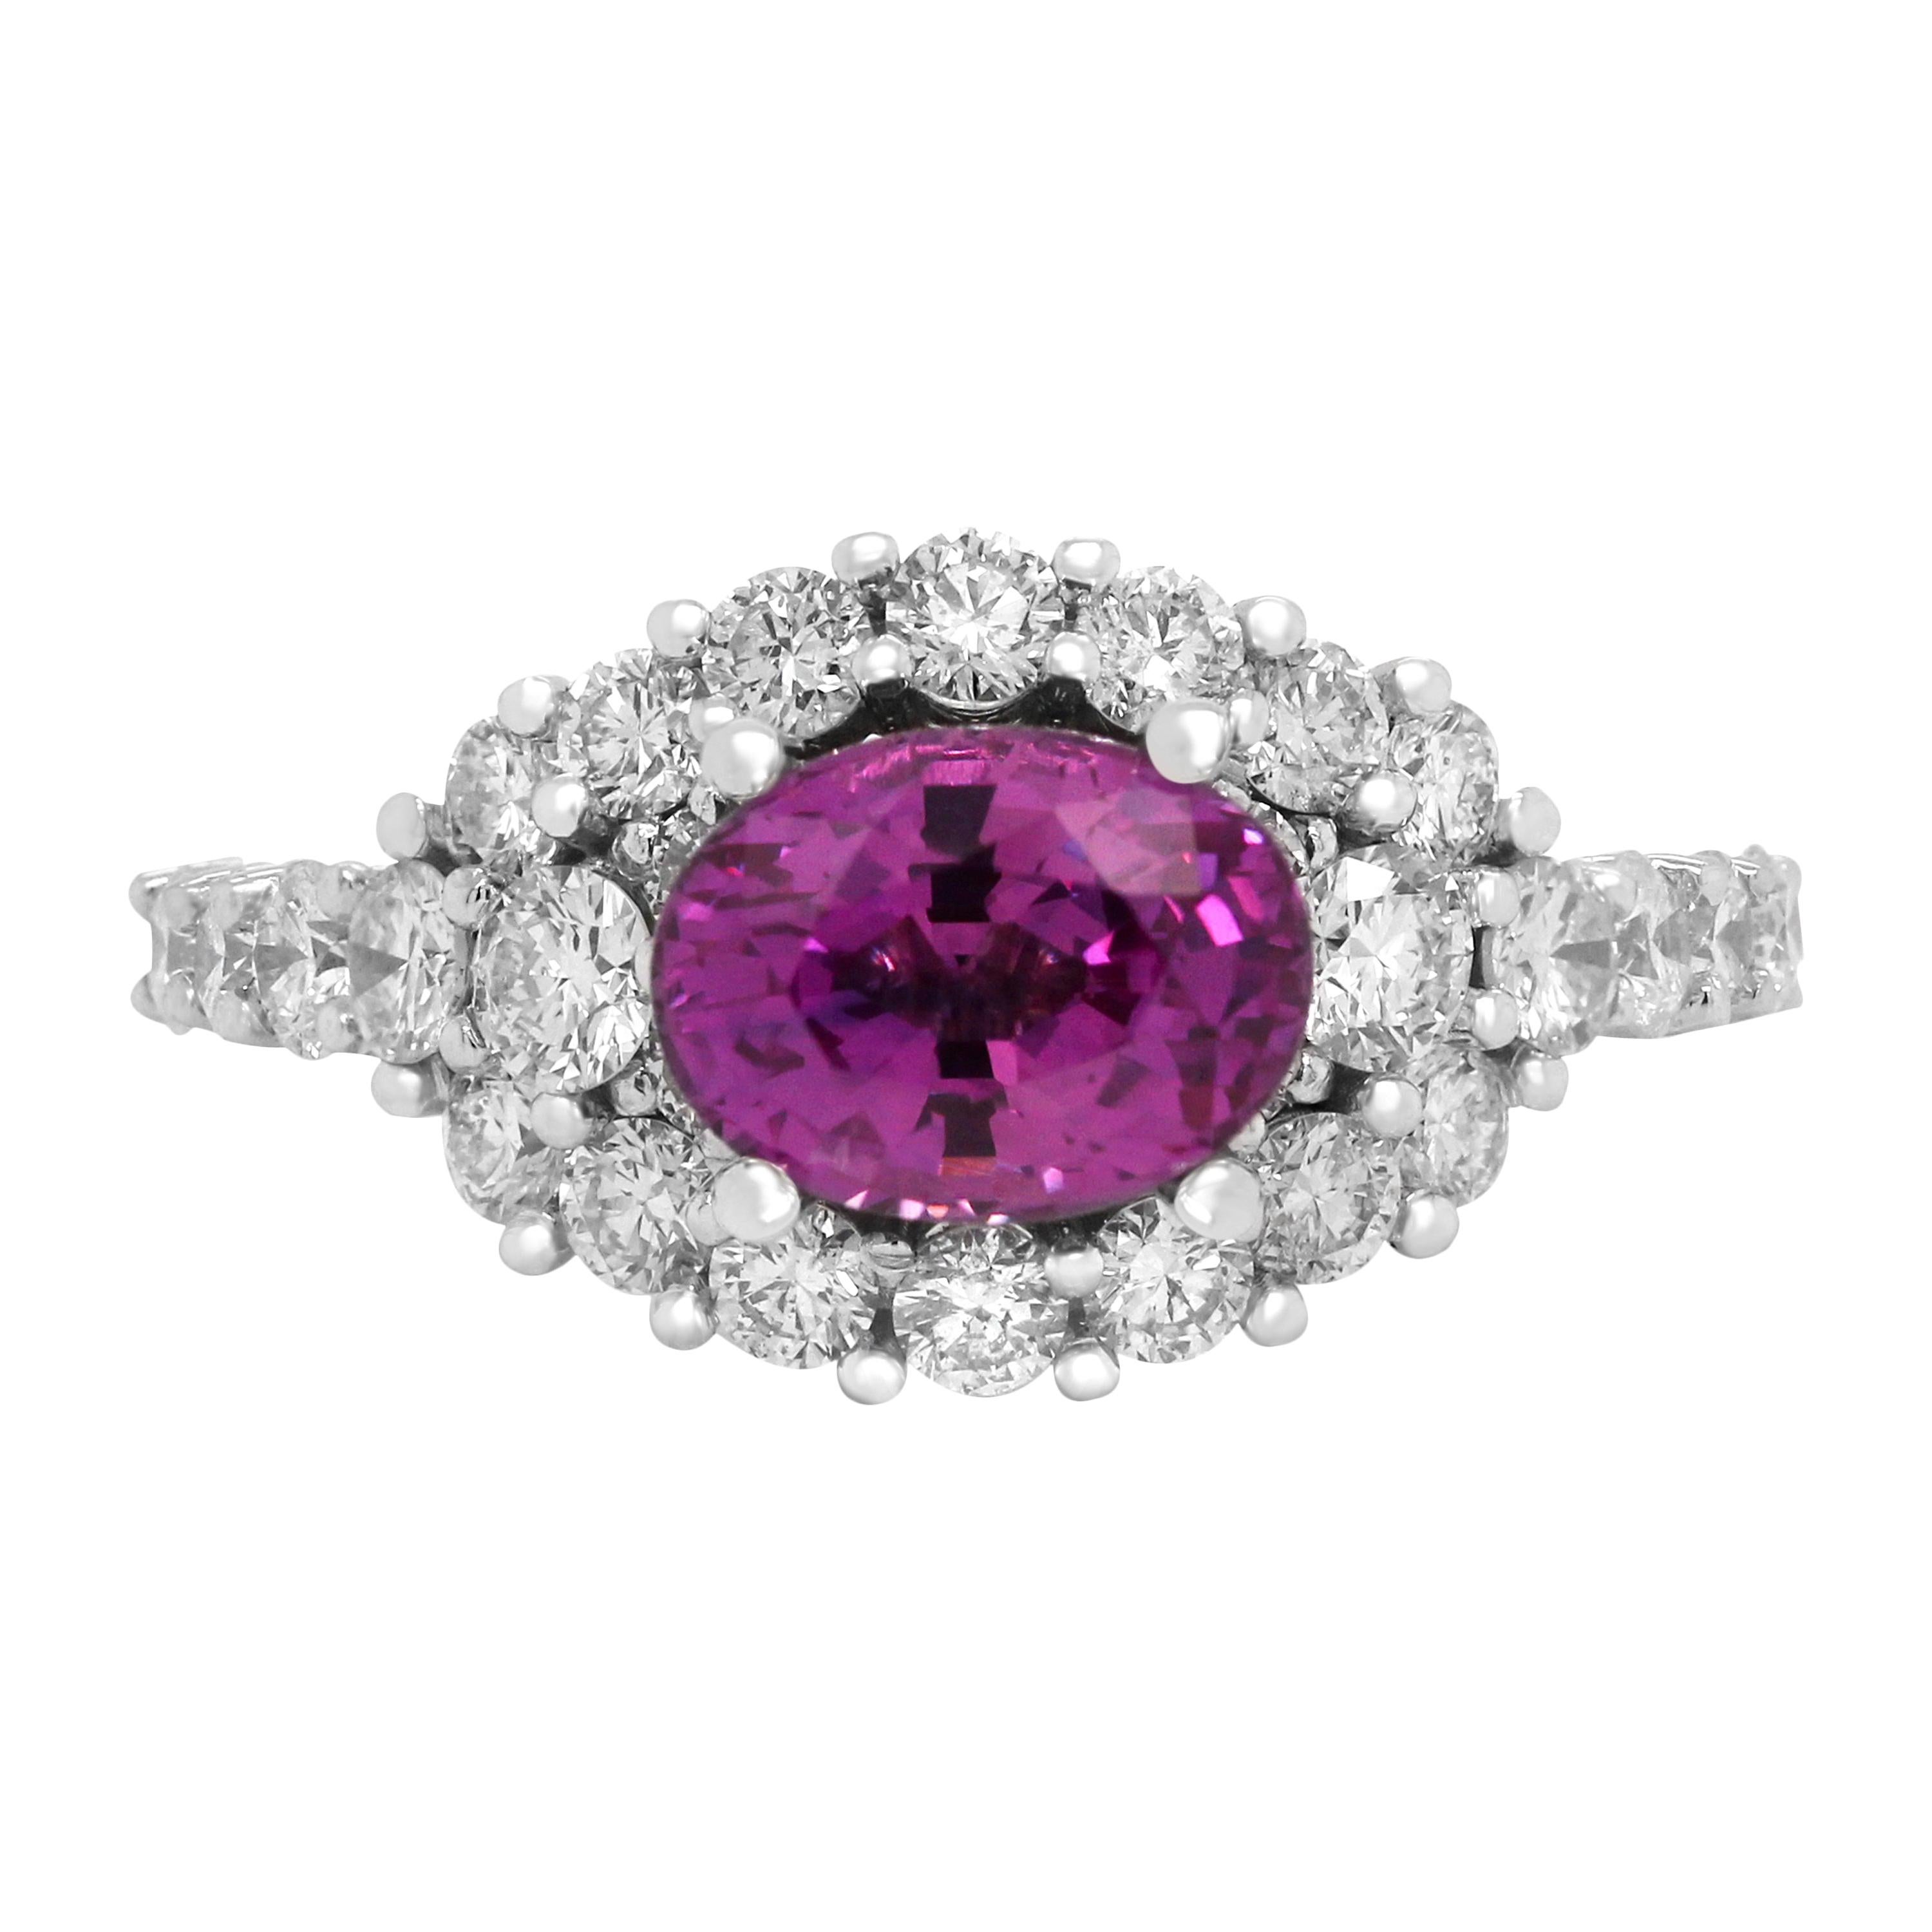 2.02 Carat Oval Bubble Gum Pink Sapphire 14k White Gold Diamond Cocktail Ring